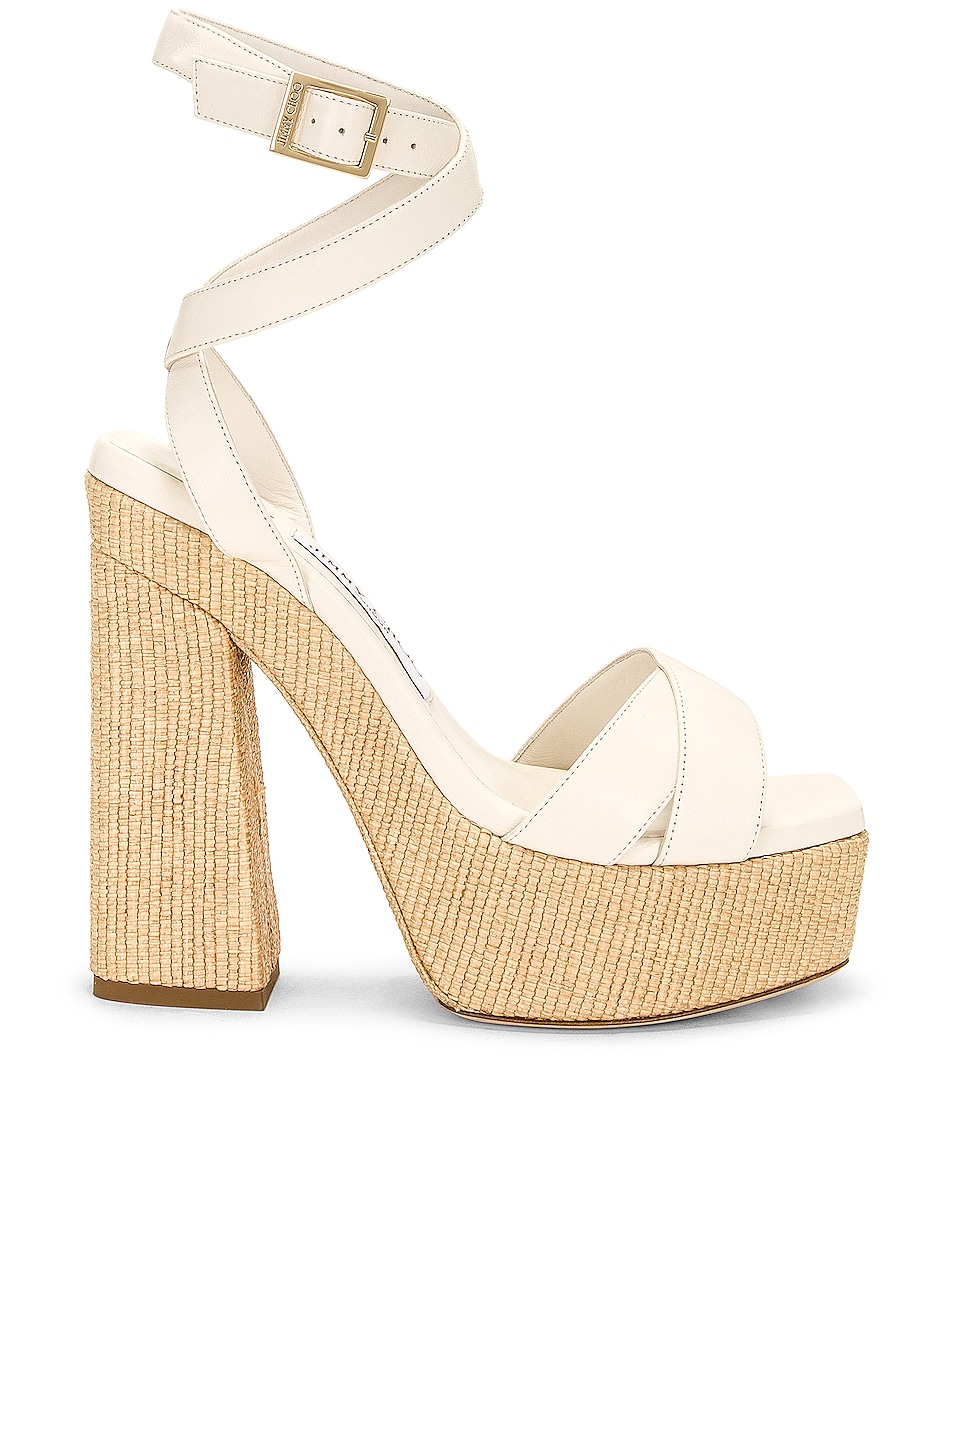 Image 1 of Jimmy Choo Gaia 140 Suede Sandal in White & Natural